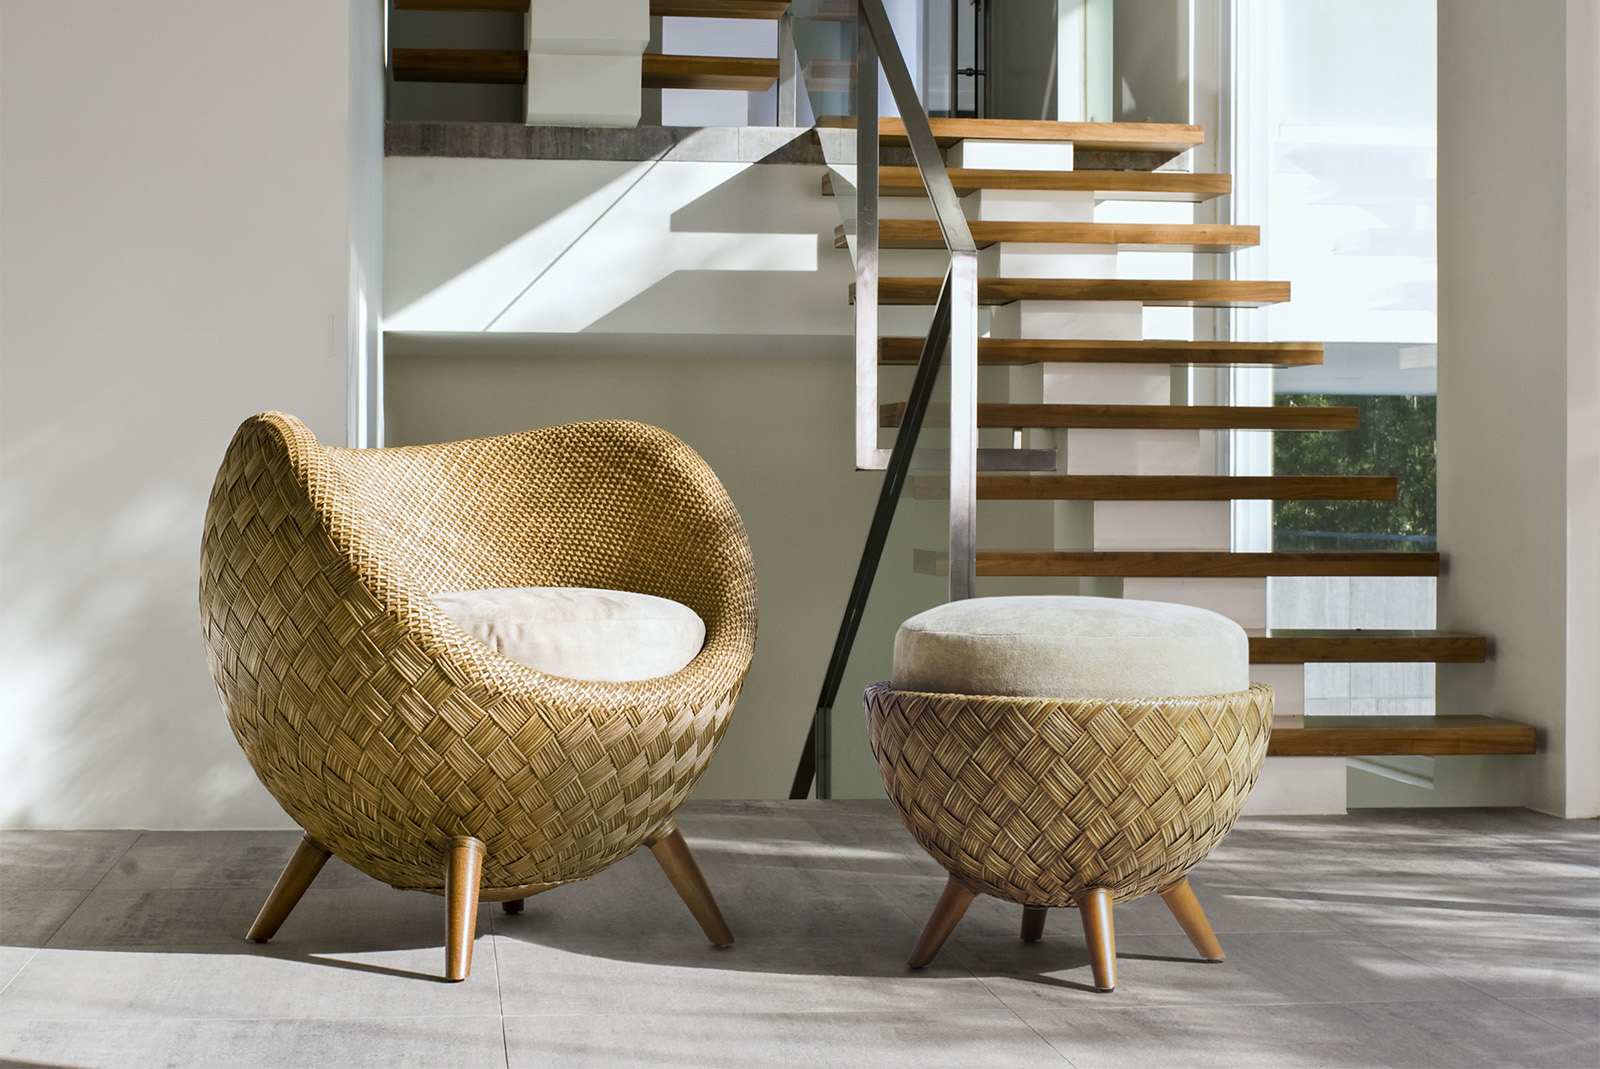  La Luna Easy Armchair and Ottoman by Kenneth Cobonpue  Photo Source: Kenneth Cobonpue 